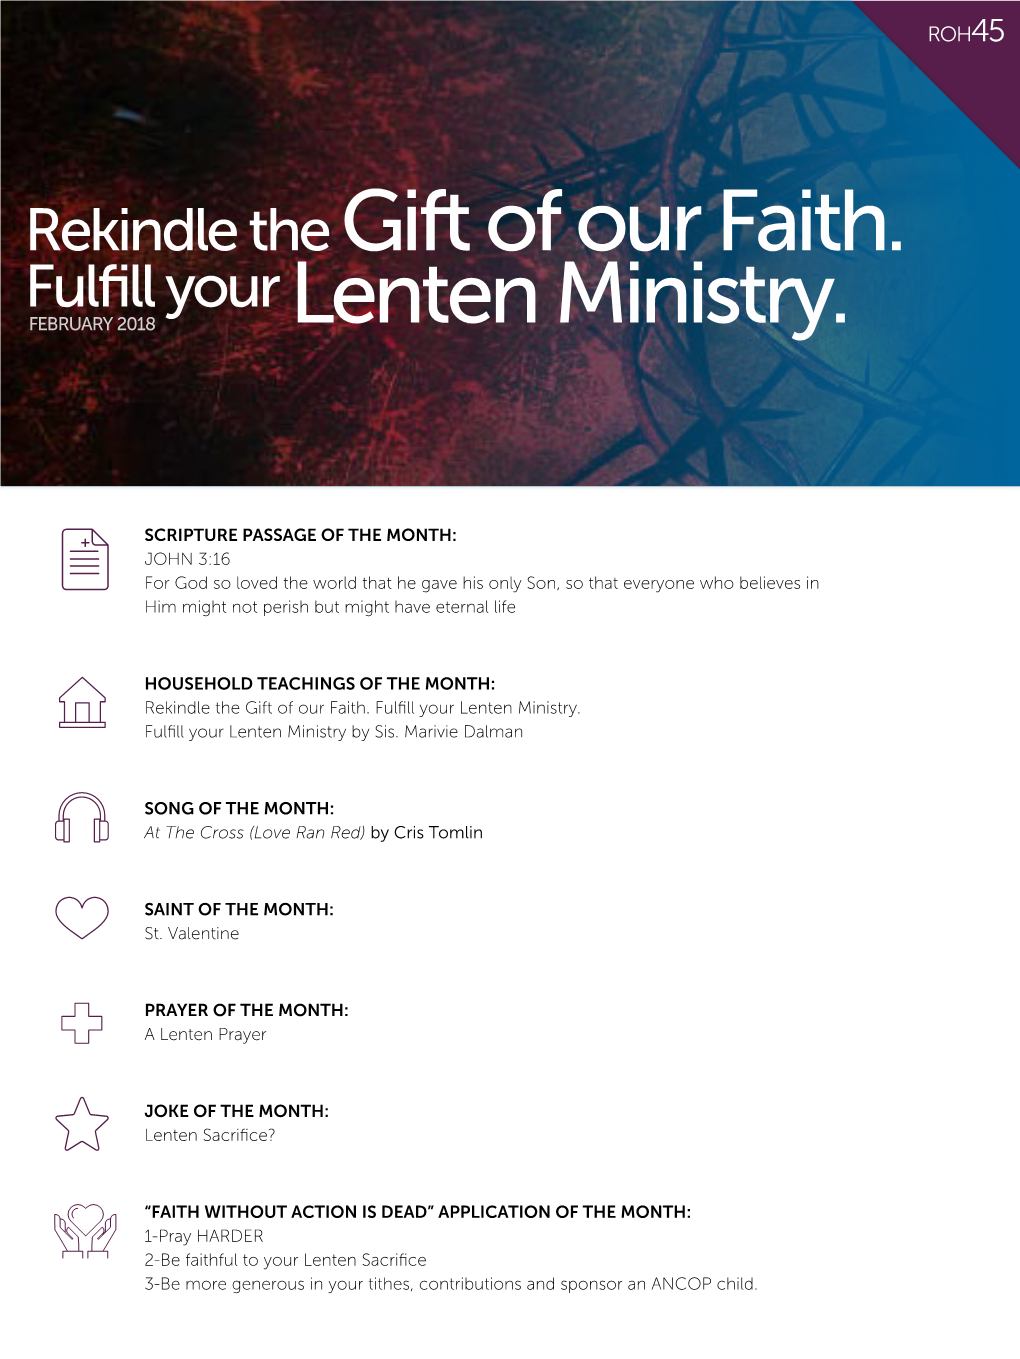 Rekindle the Gift of Our Faith. Fulfill Your Lenten Ministry. Fulfill Your Lenten Ministry by Sis